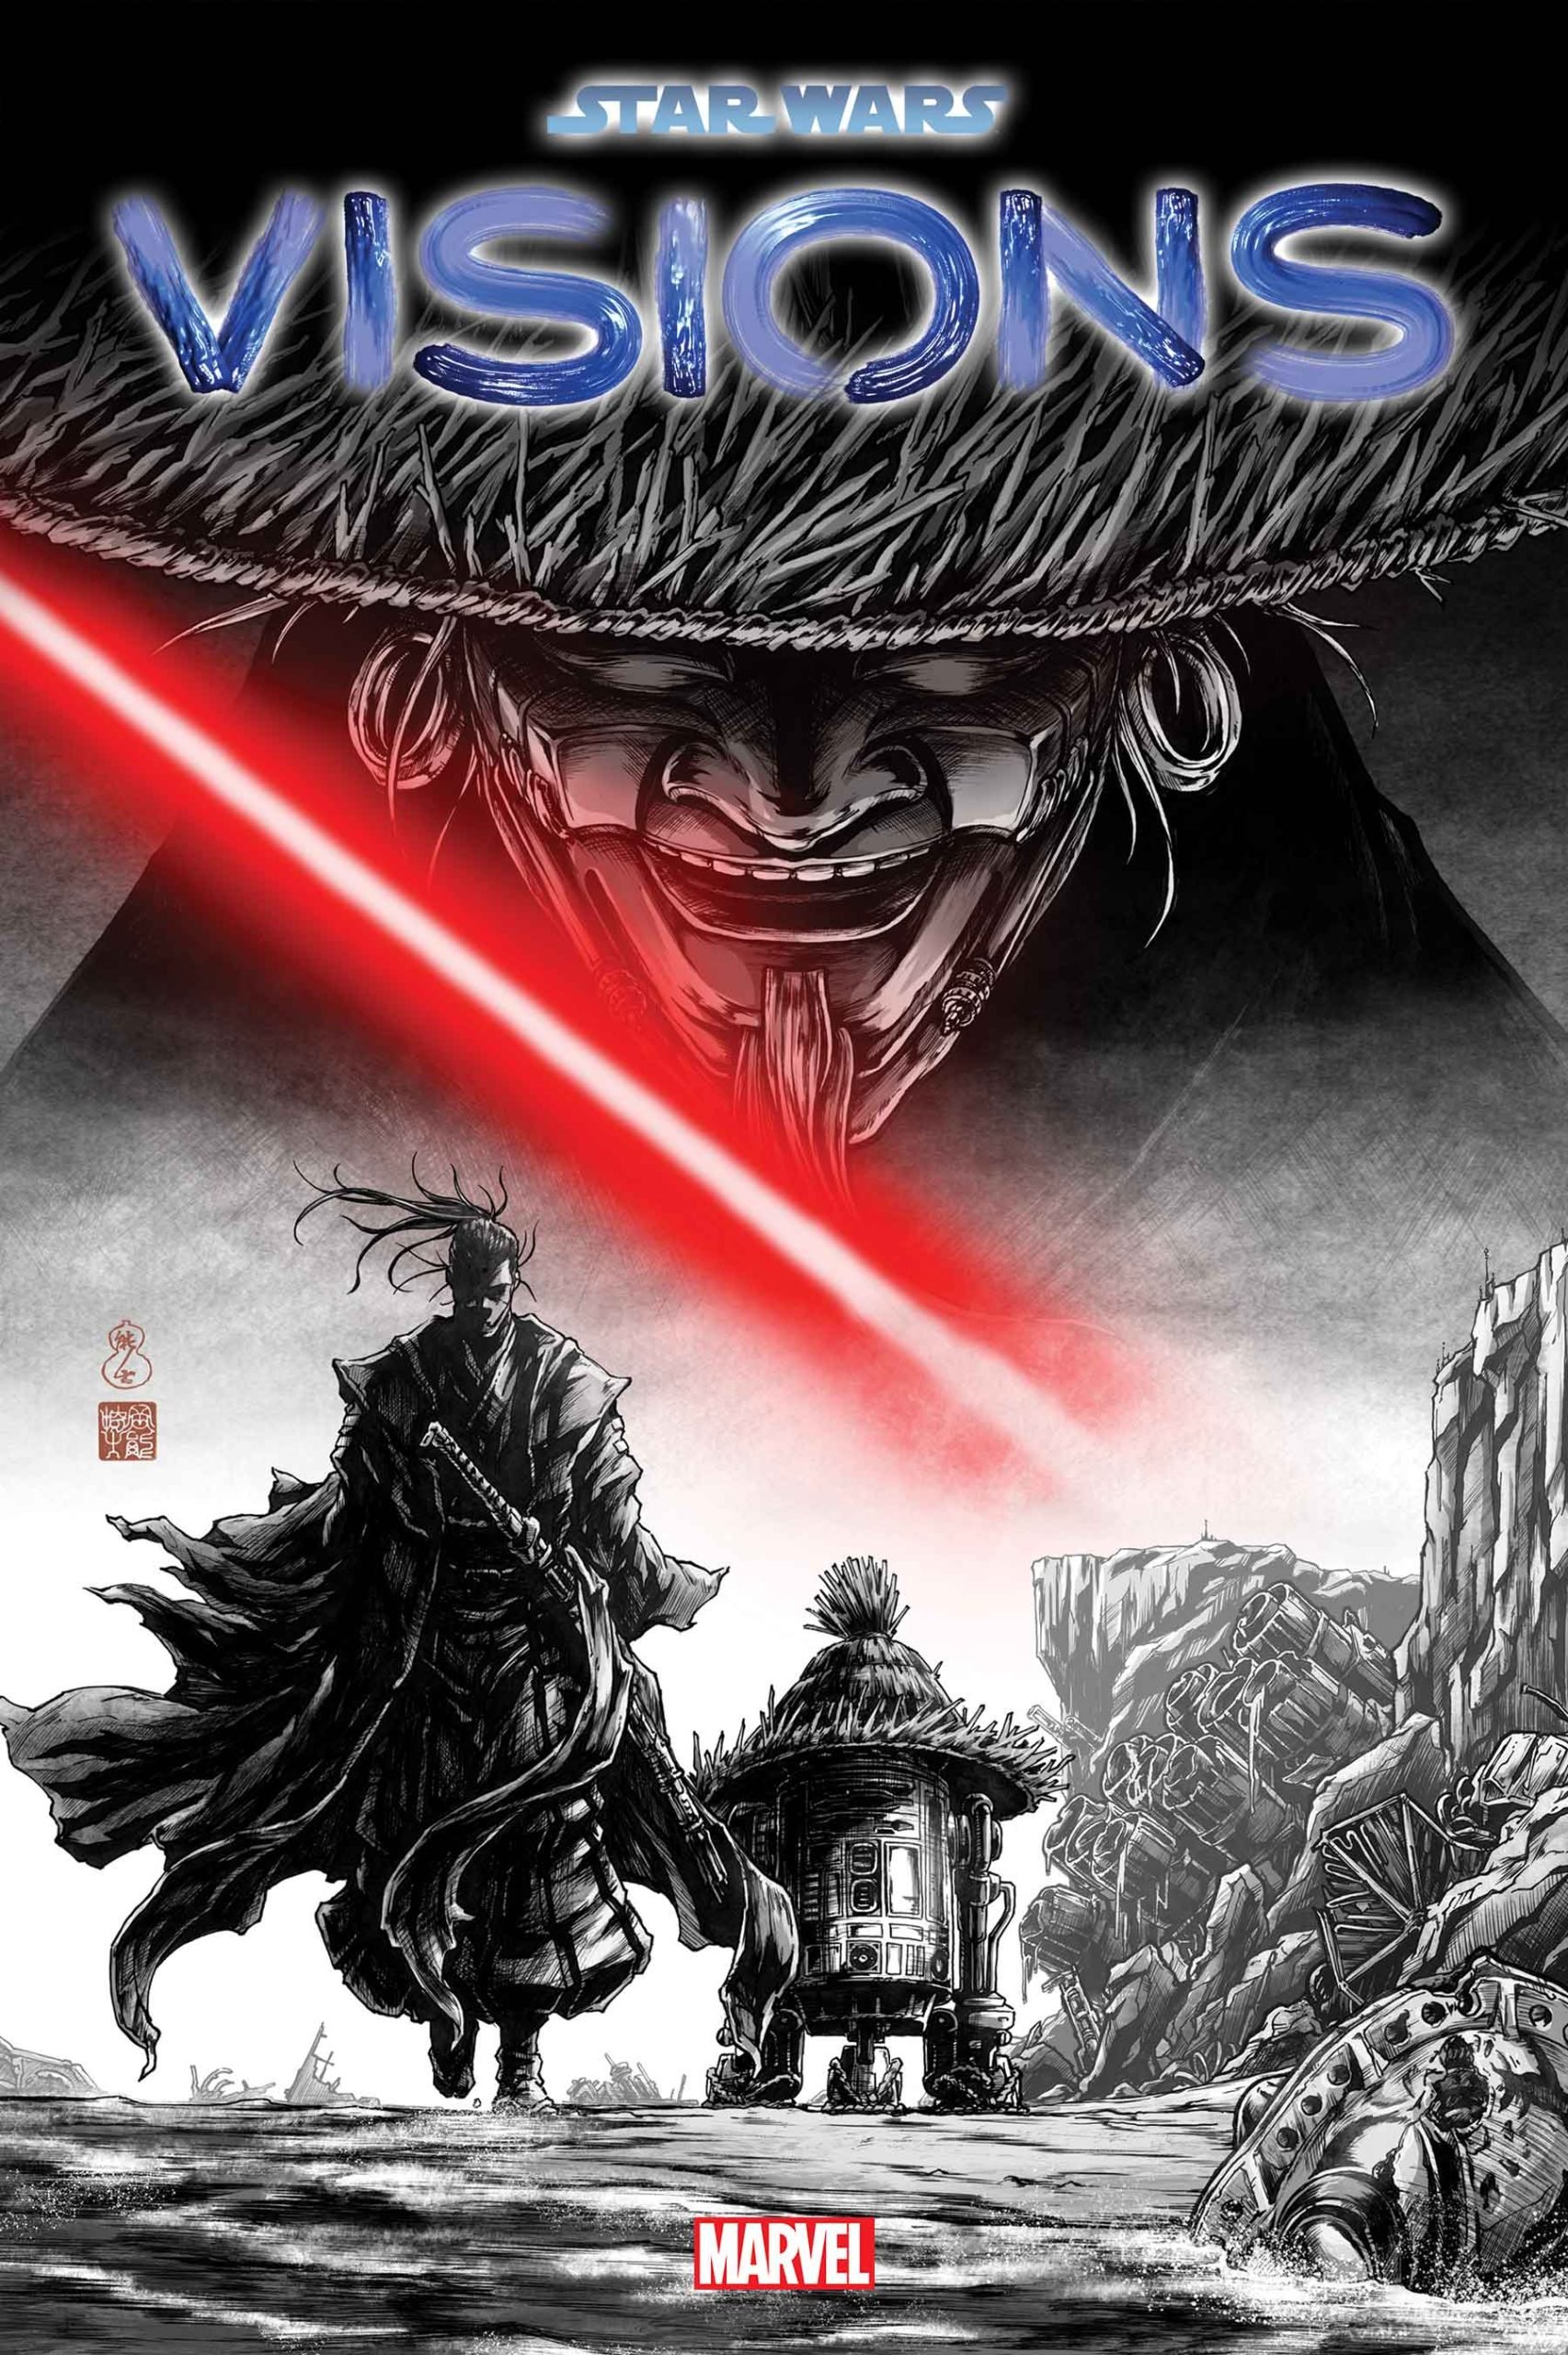 Star Wars: Visions - The Ronin returns in a new one-shot from Takashi Okazaki